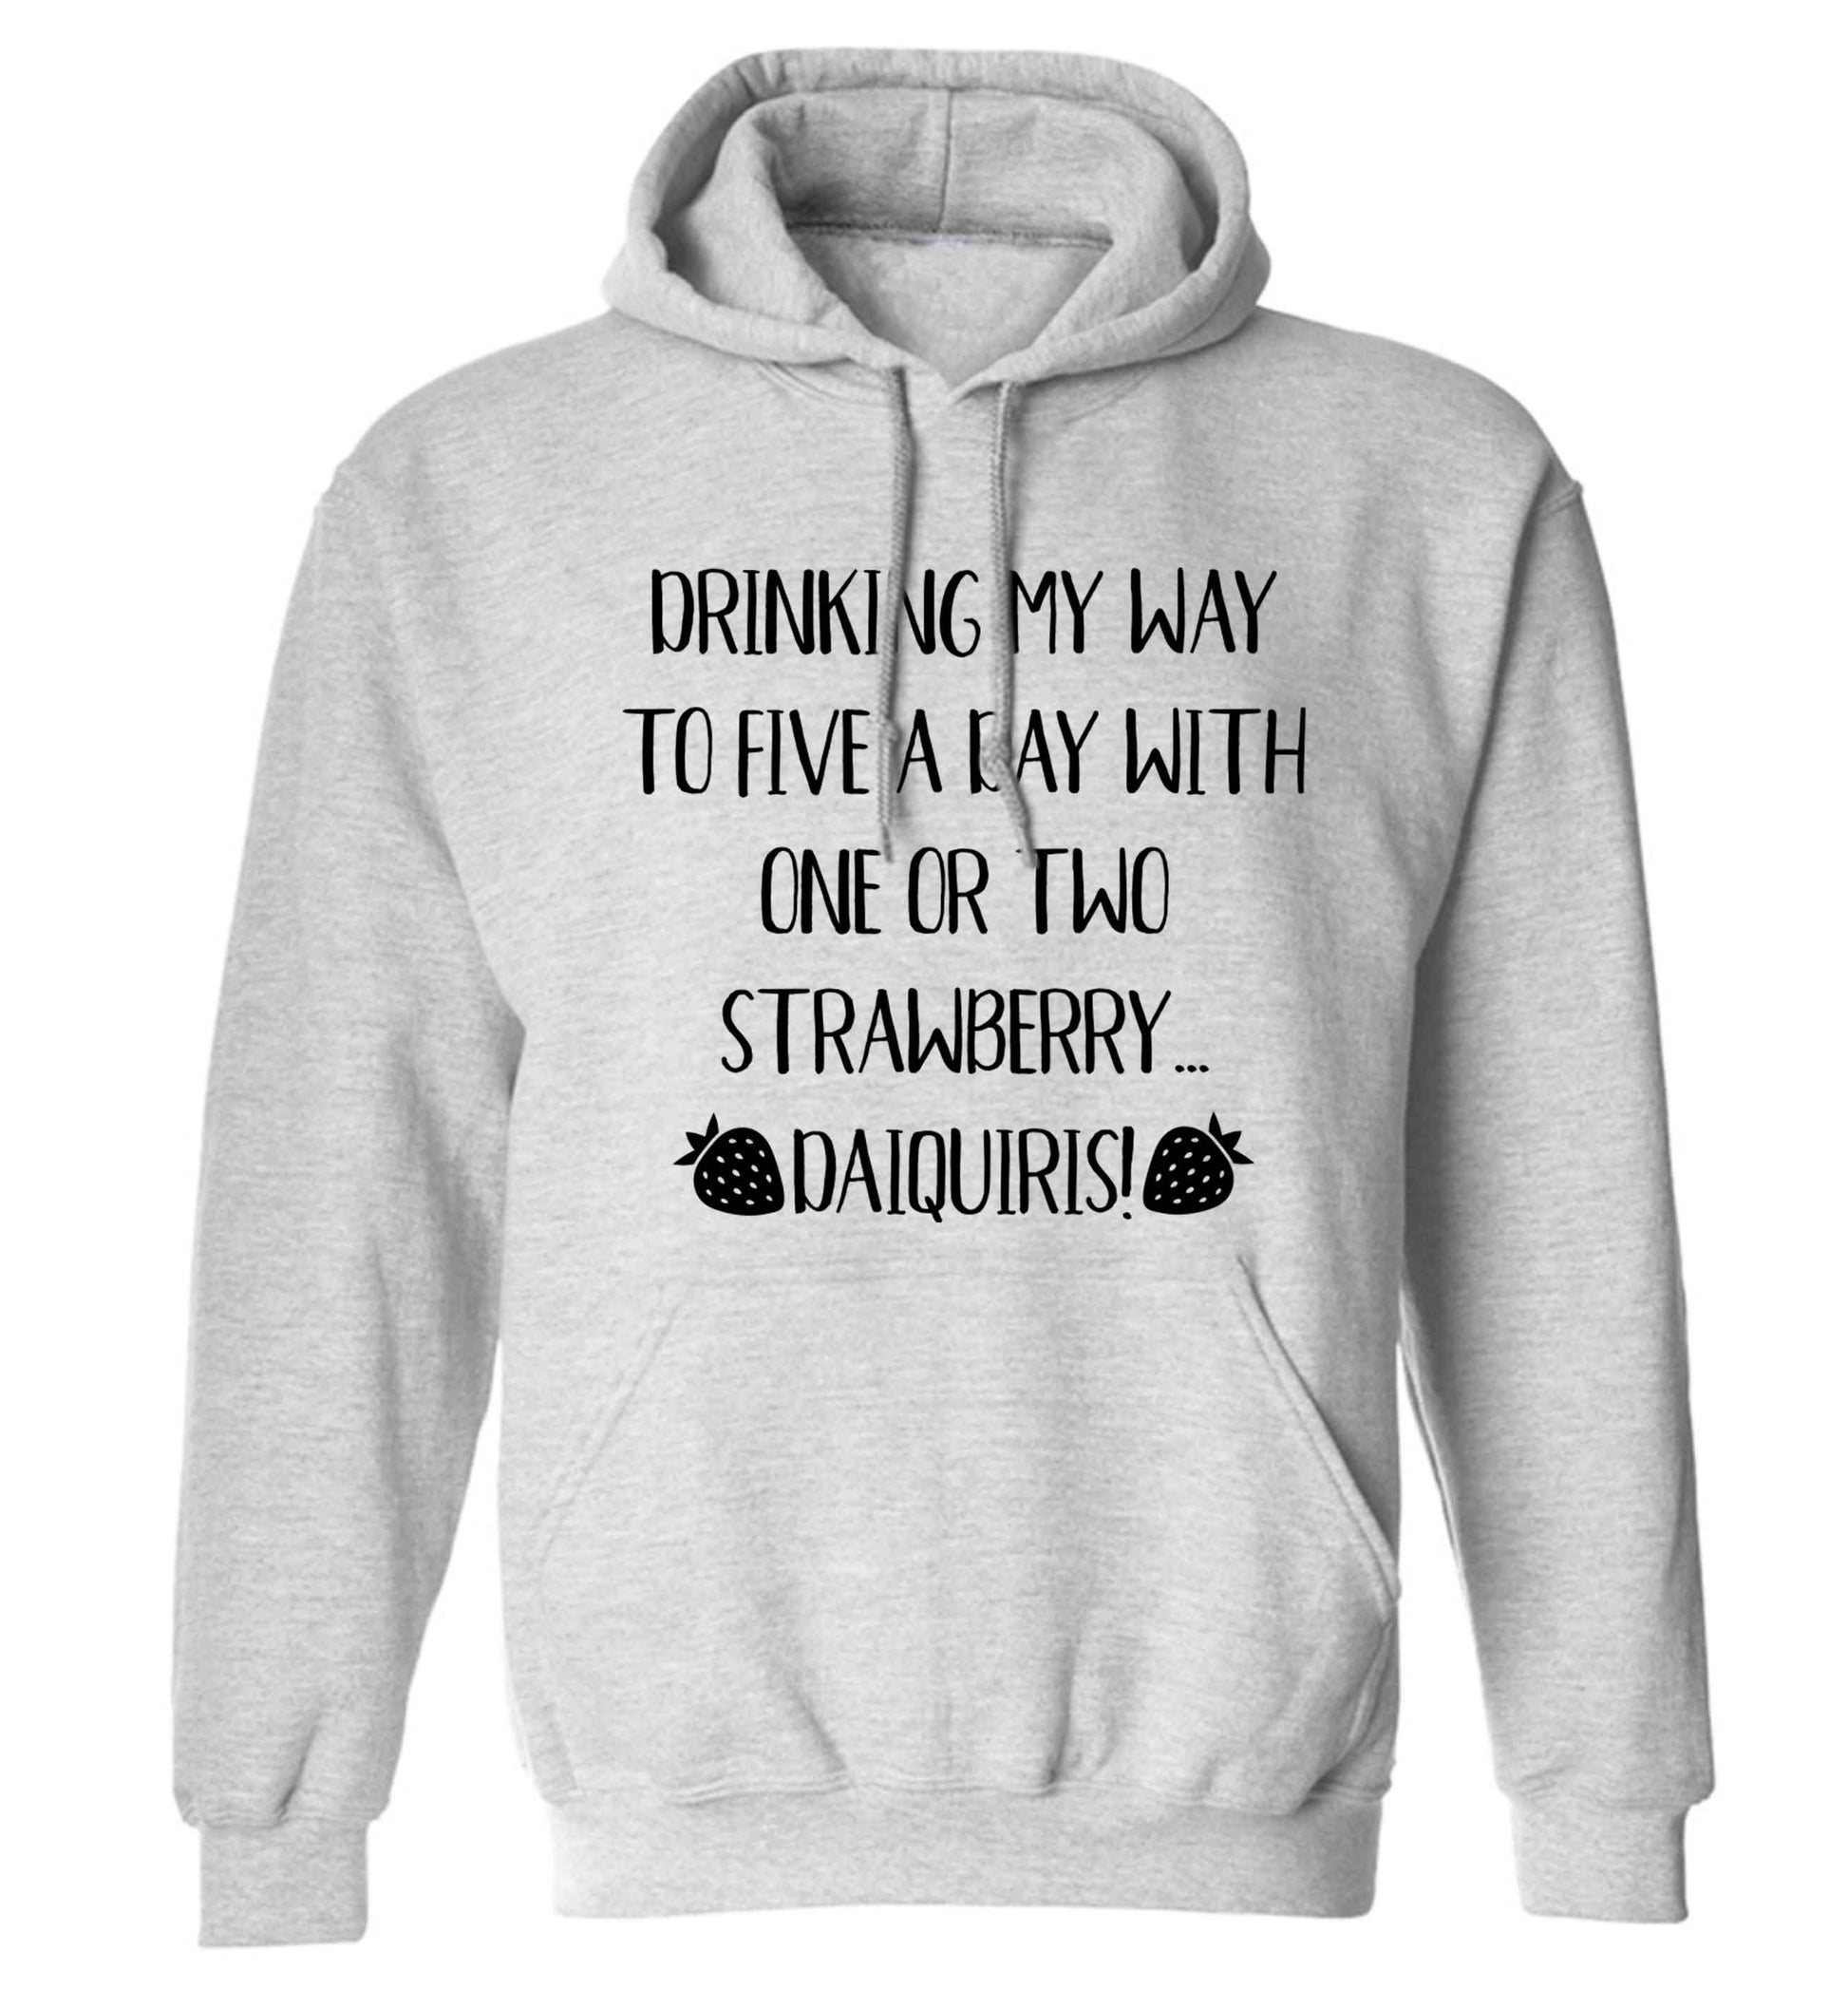 Drinking my way to five a day with one or two straberry daiquiris adults unisex grey hoodie 2XL